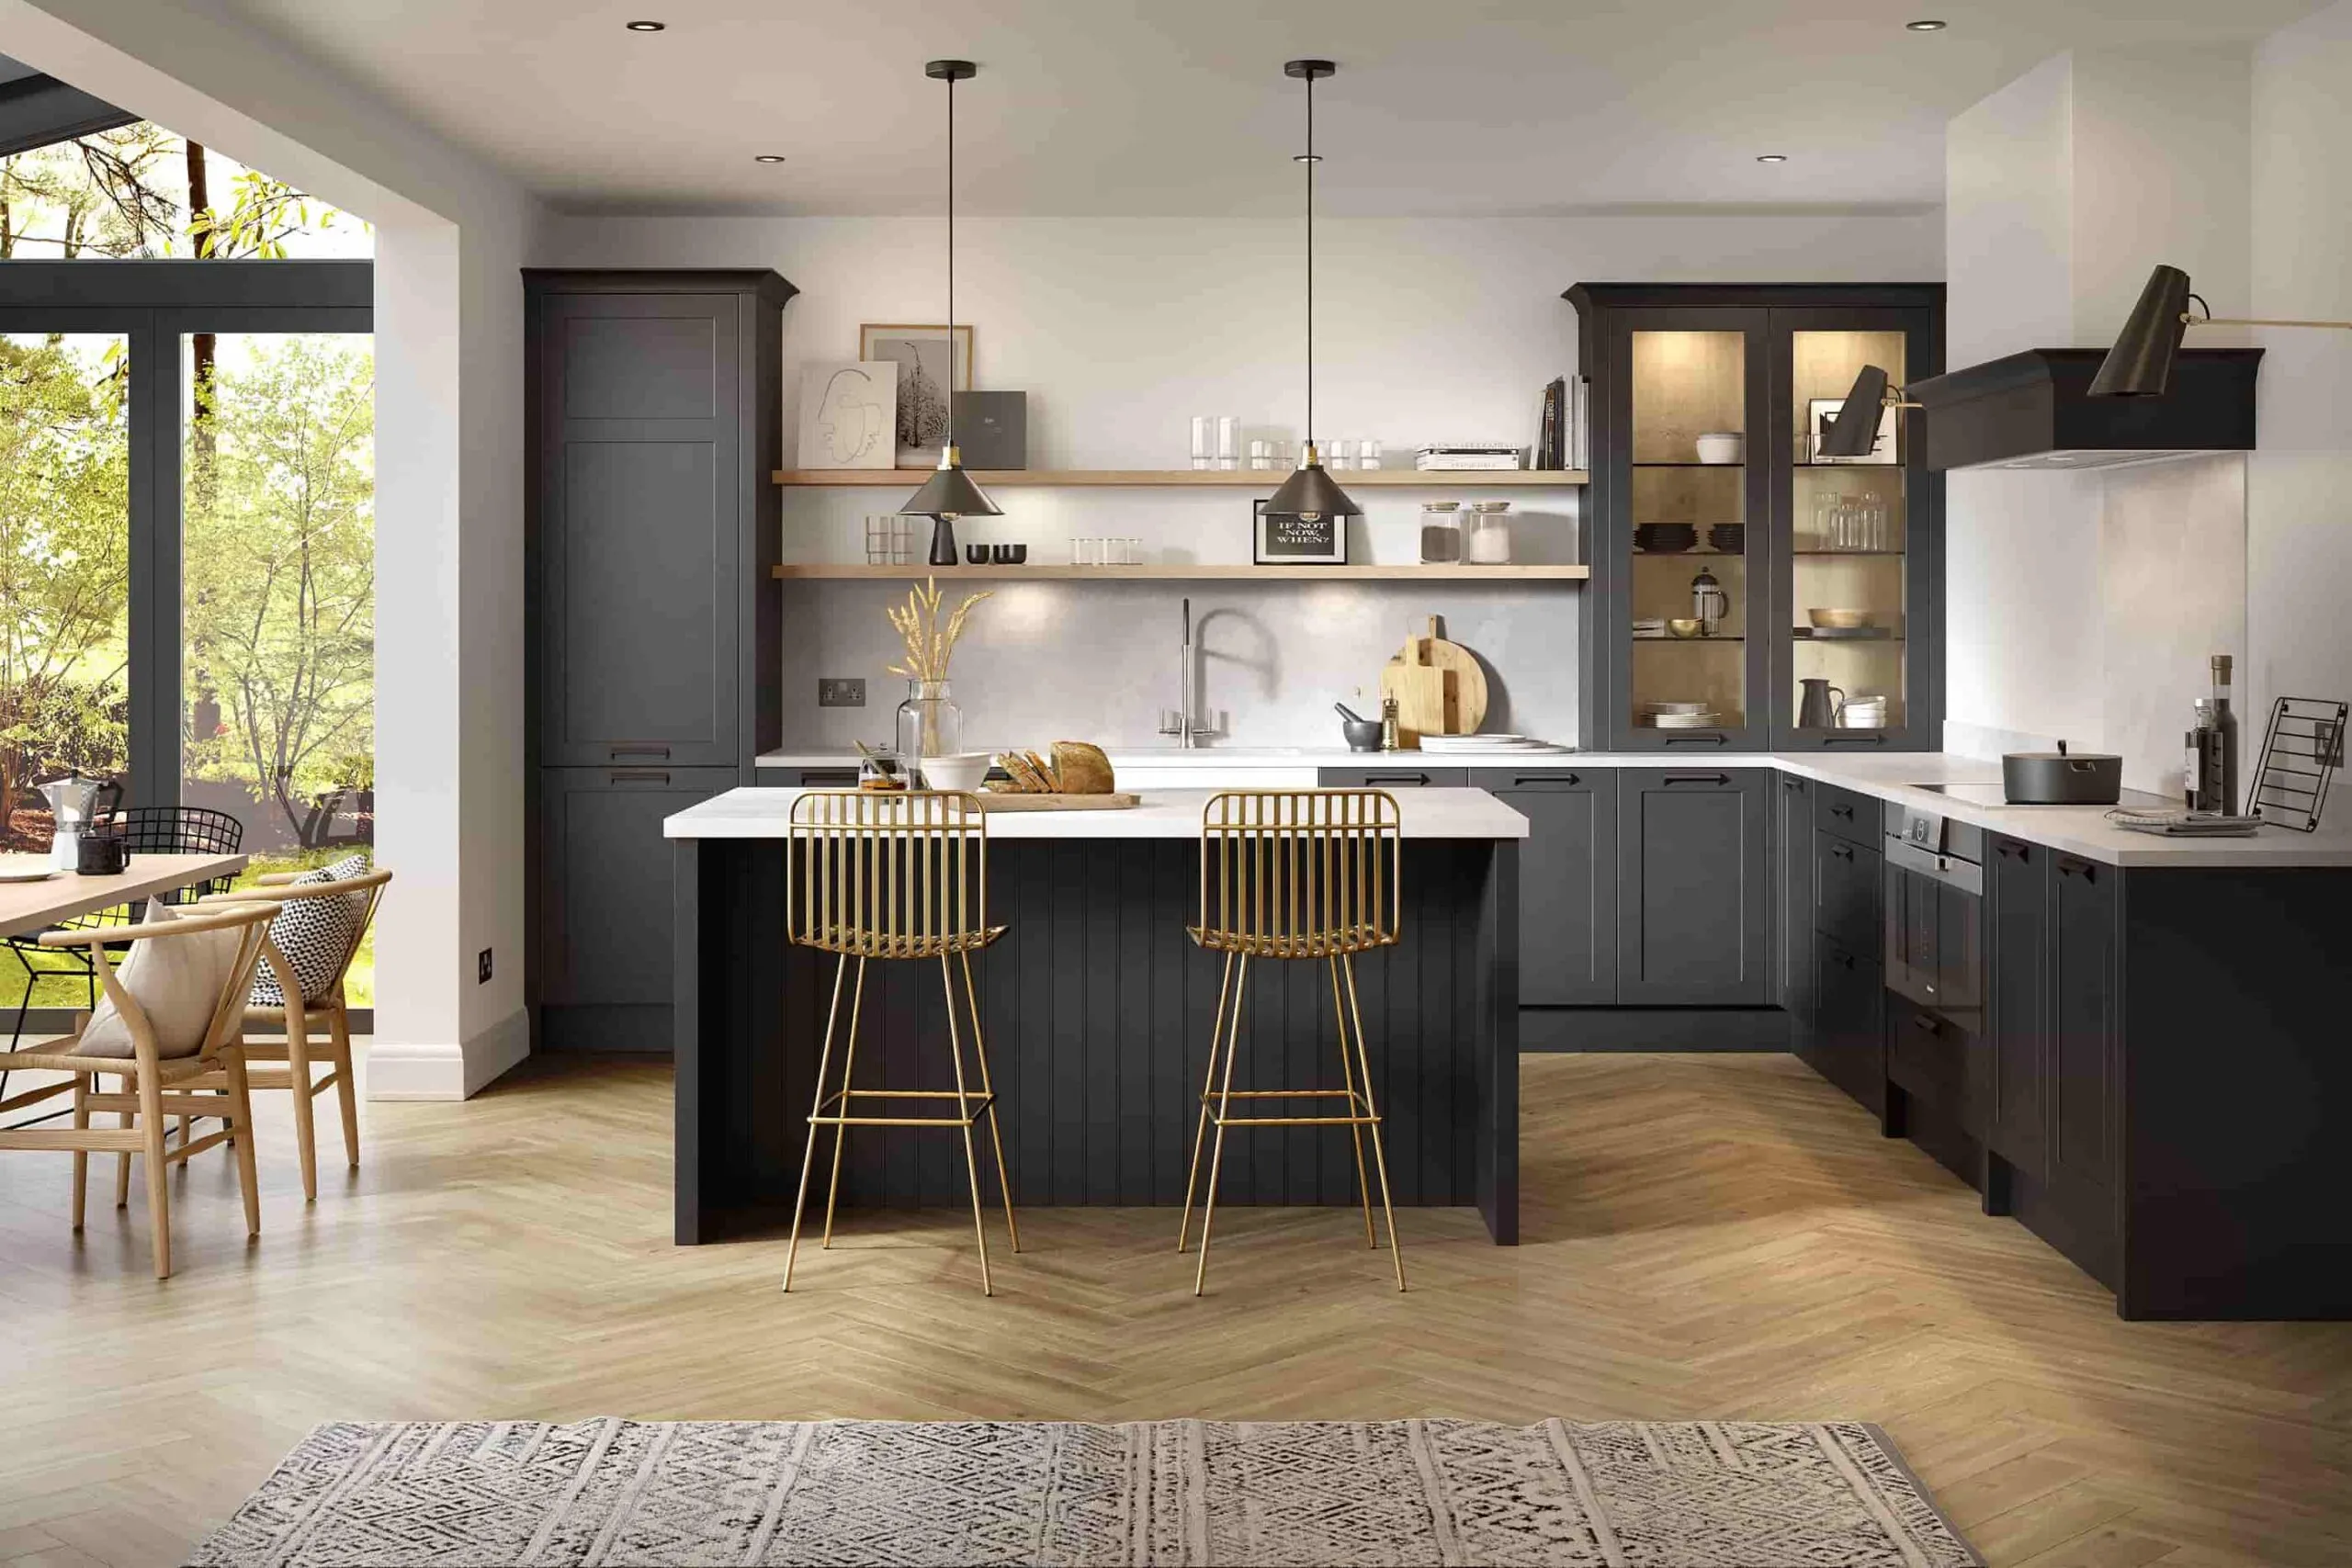 Island kitchen with metal stools, gold faux stools, white walls, white countertop, grey island body, grey cabinets, two pendant lights above the island, wooden laminated floor